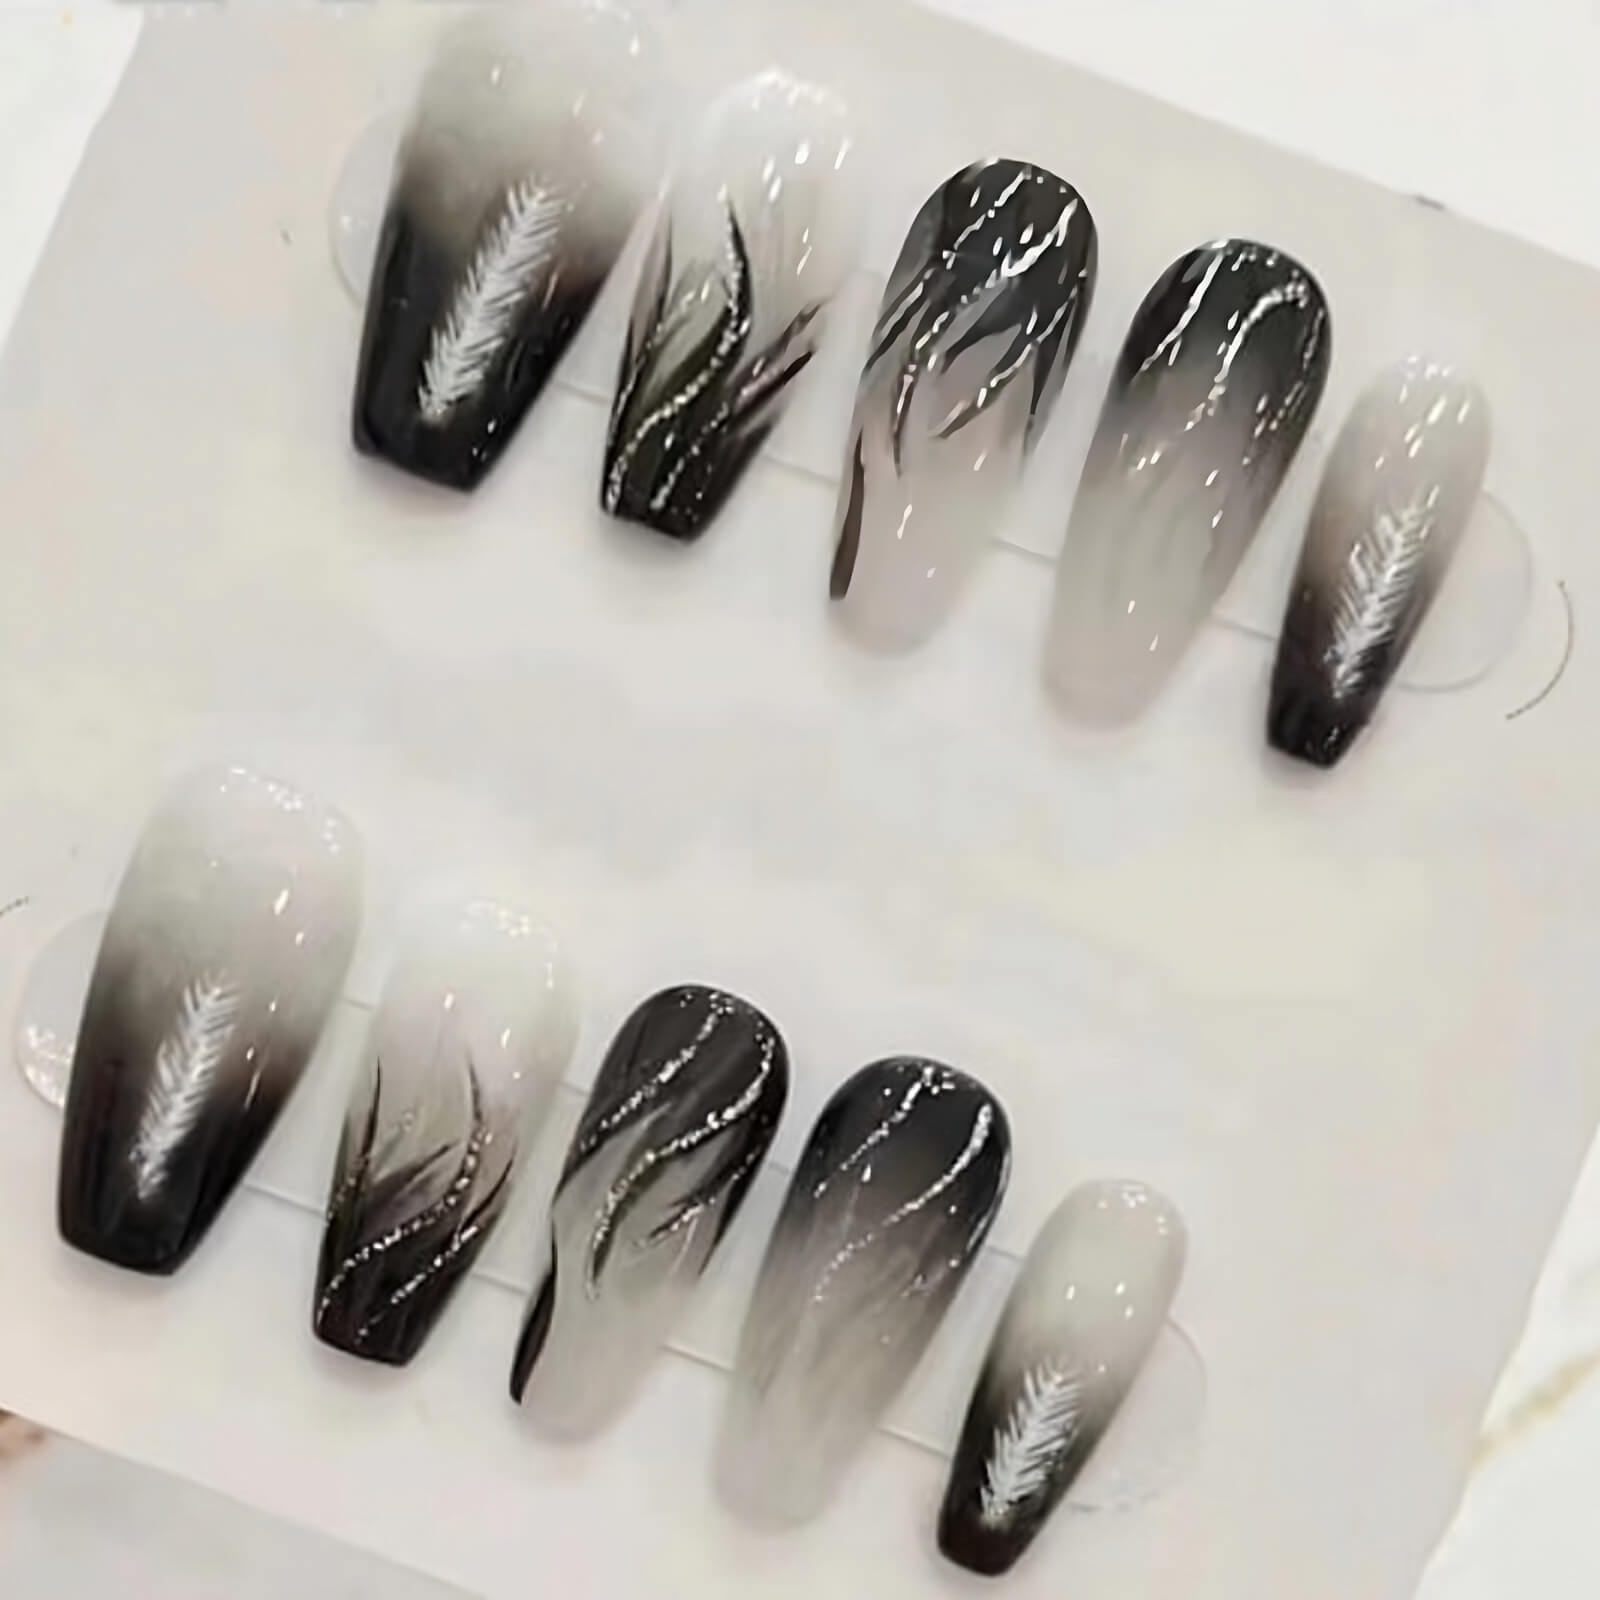 Vibeficant Glaze Black Ombre Press on Nails Medium Coffin French Tip with Feather Design